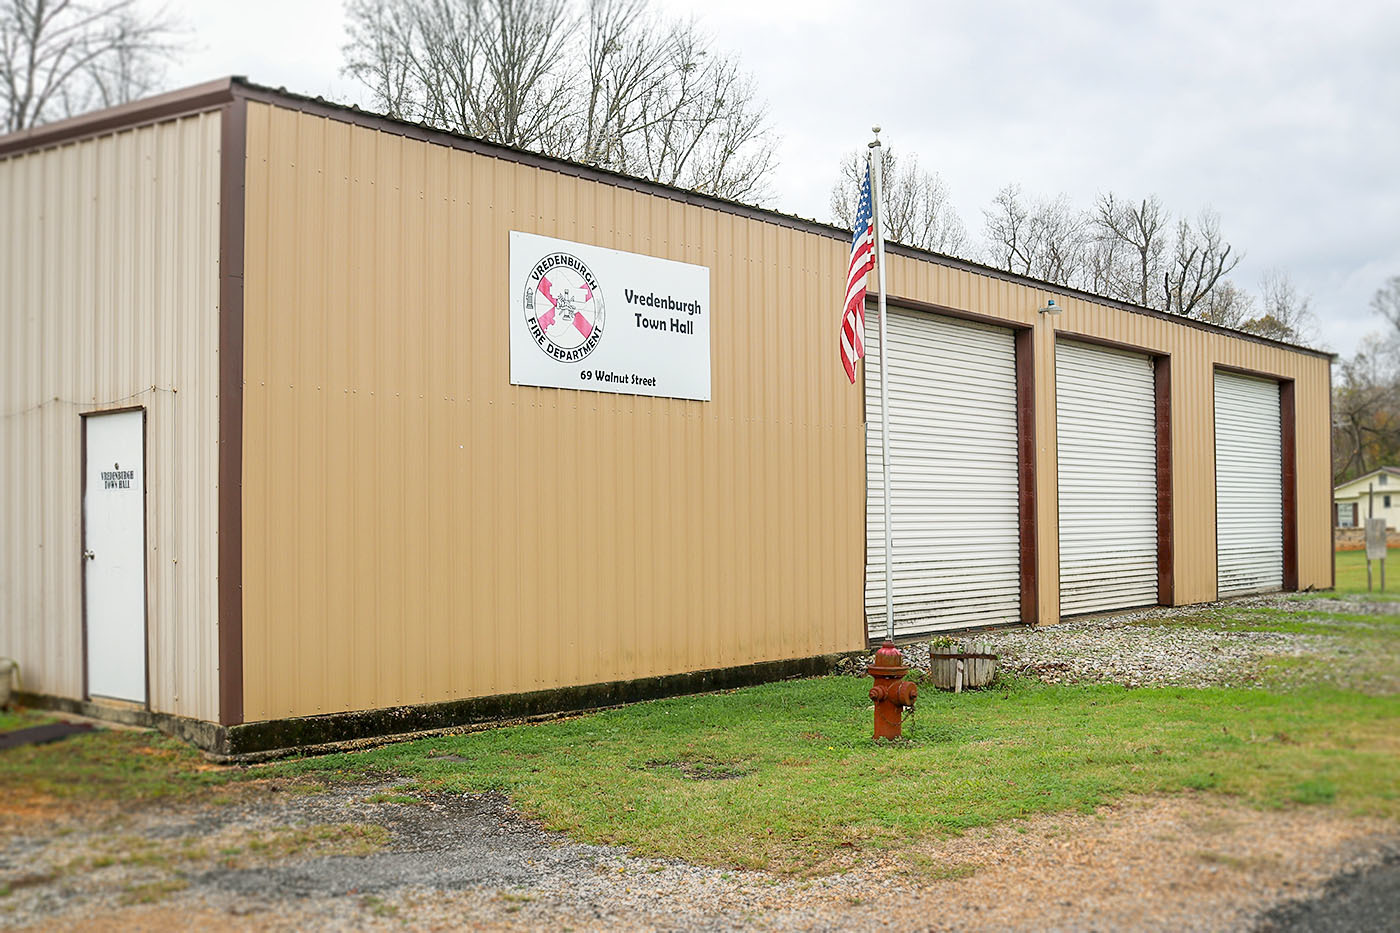 Vredenbgurgh City Hall shares a space with the volunteer fire department. It is one of several facilities in the community that will receive sanitizing supplies to help combat the coronavirus.